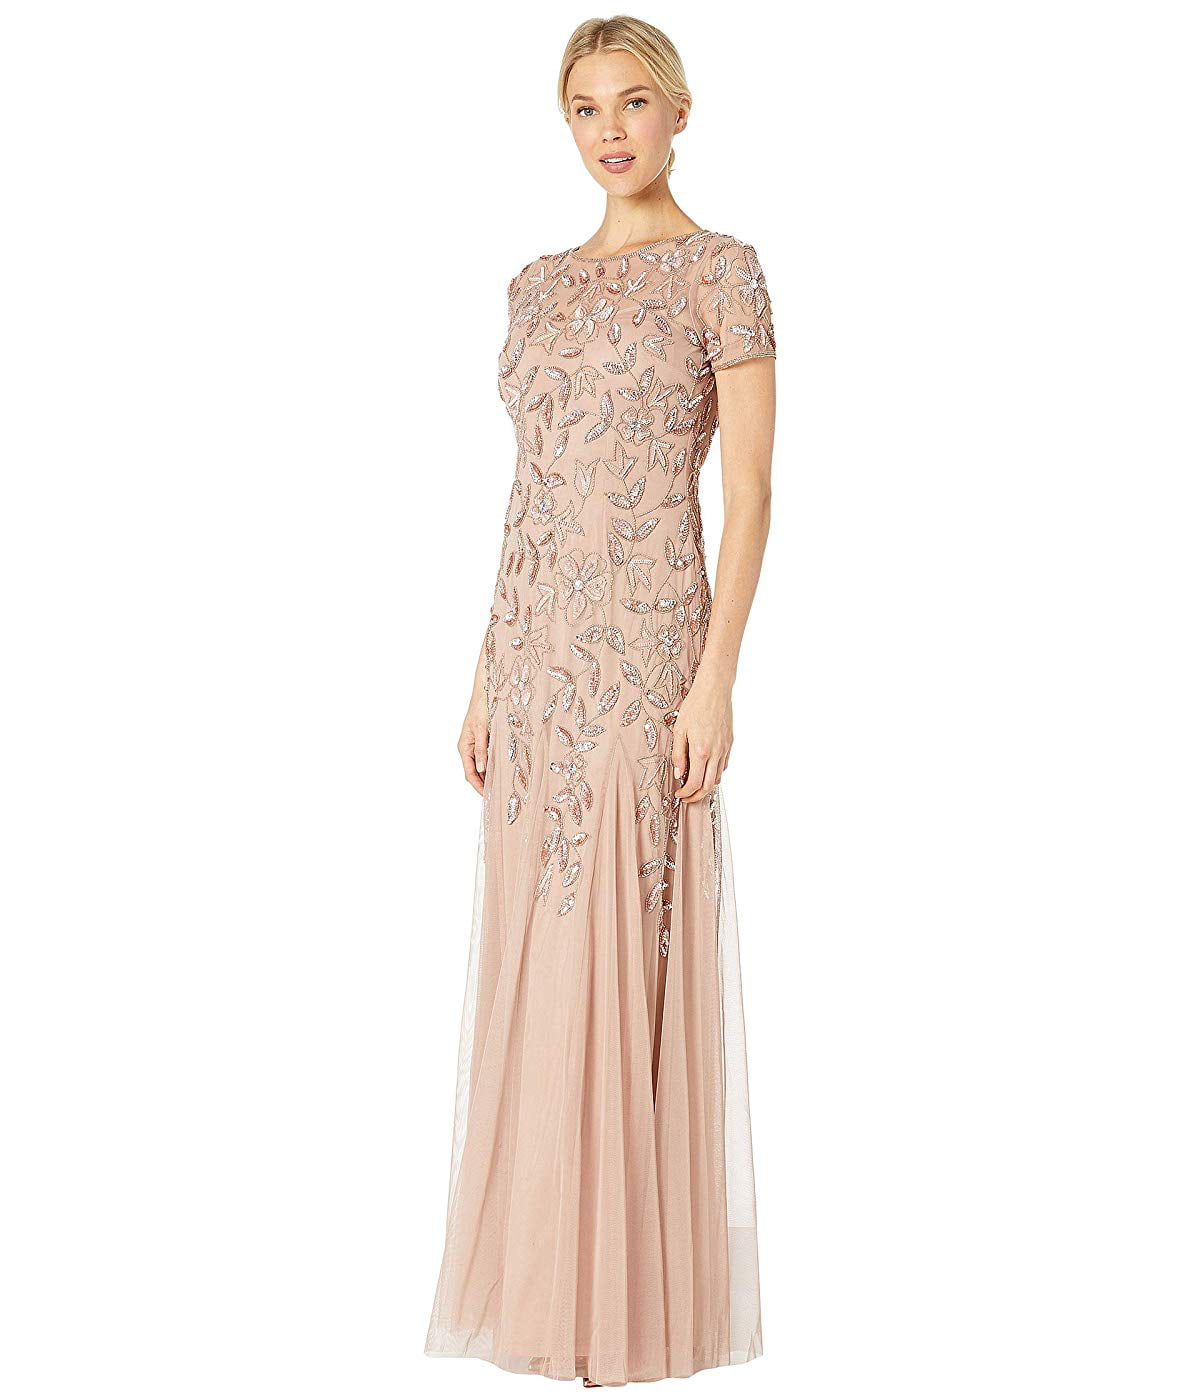 Adrianna Papell - Adrianna Papell Floral Beaded Godet Evening Gown Rose ...